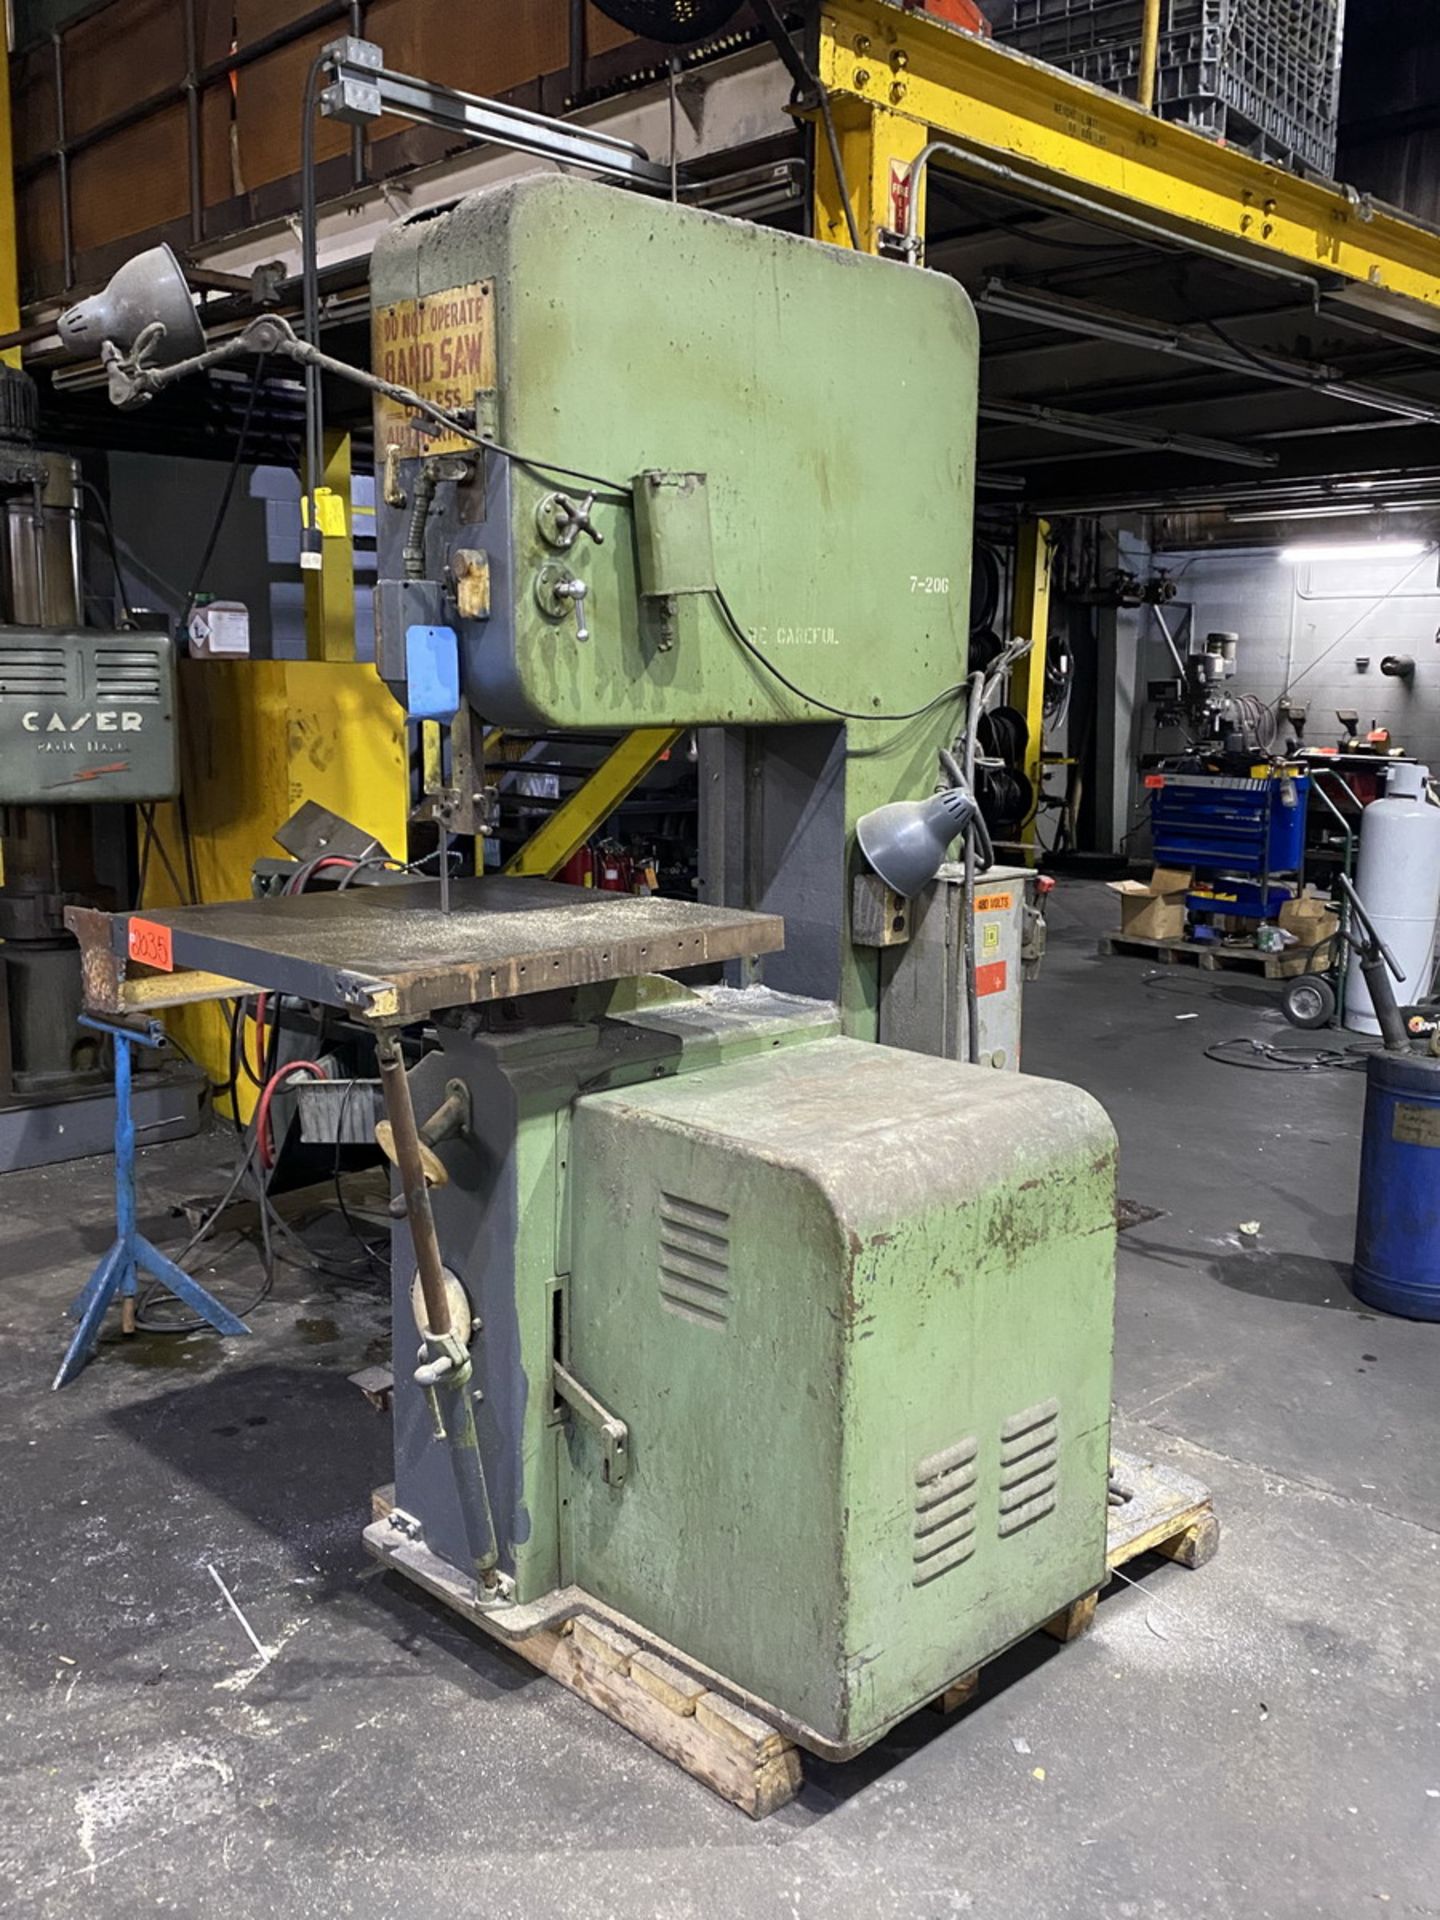 DoAll 26 in. Job Selector Vertical Band Saw; with Blade Welder & Grinder (Ref. #: B-Saw-1) - Image 2 of 8